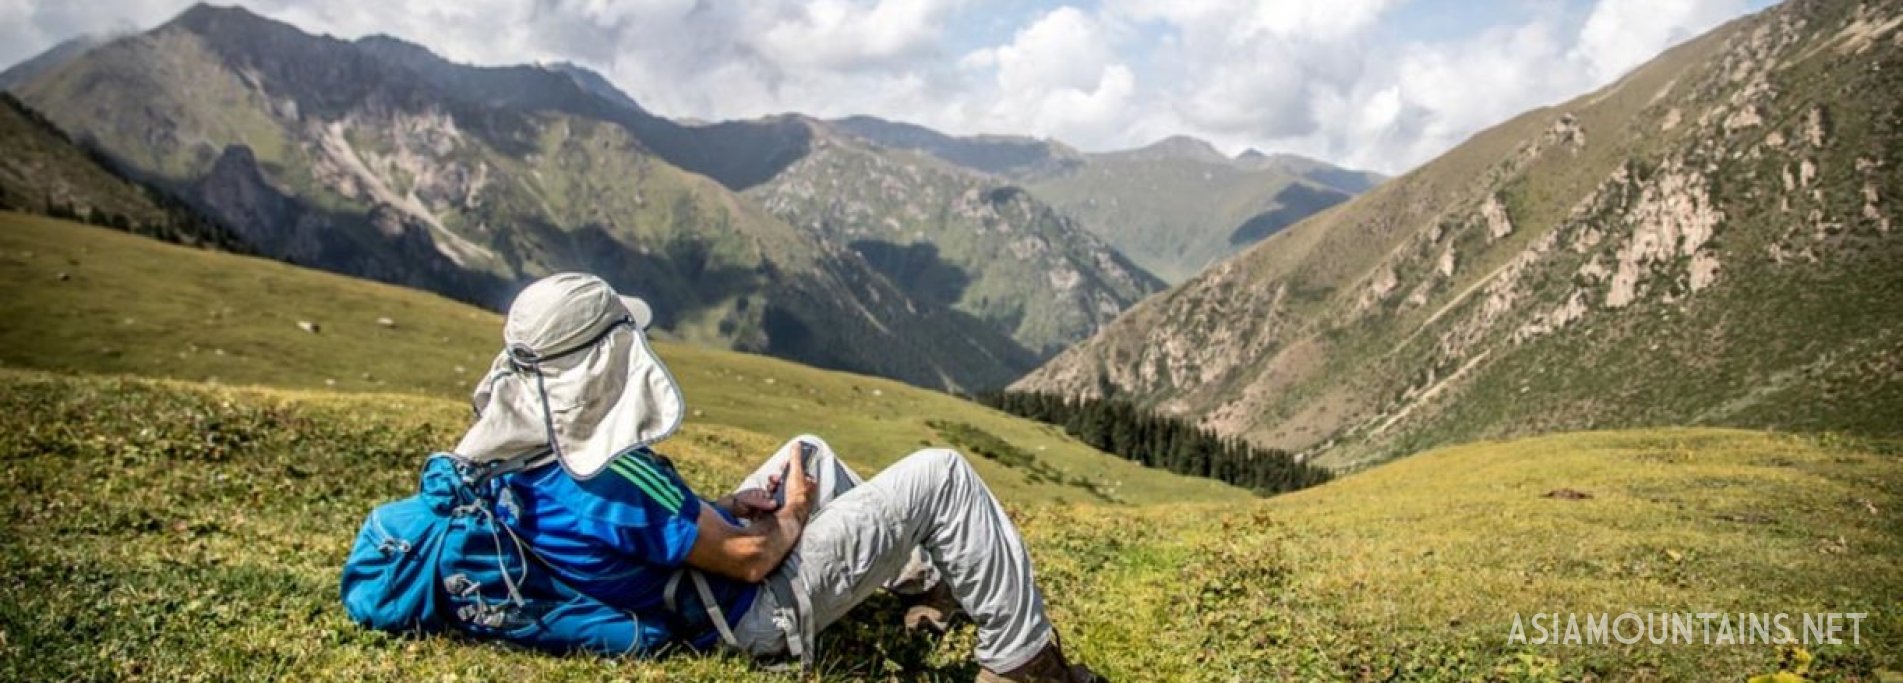 Learn more about adventures in Kyrgyzstan